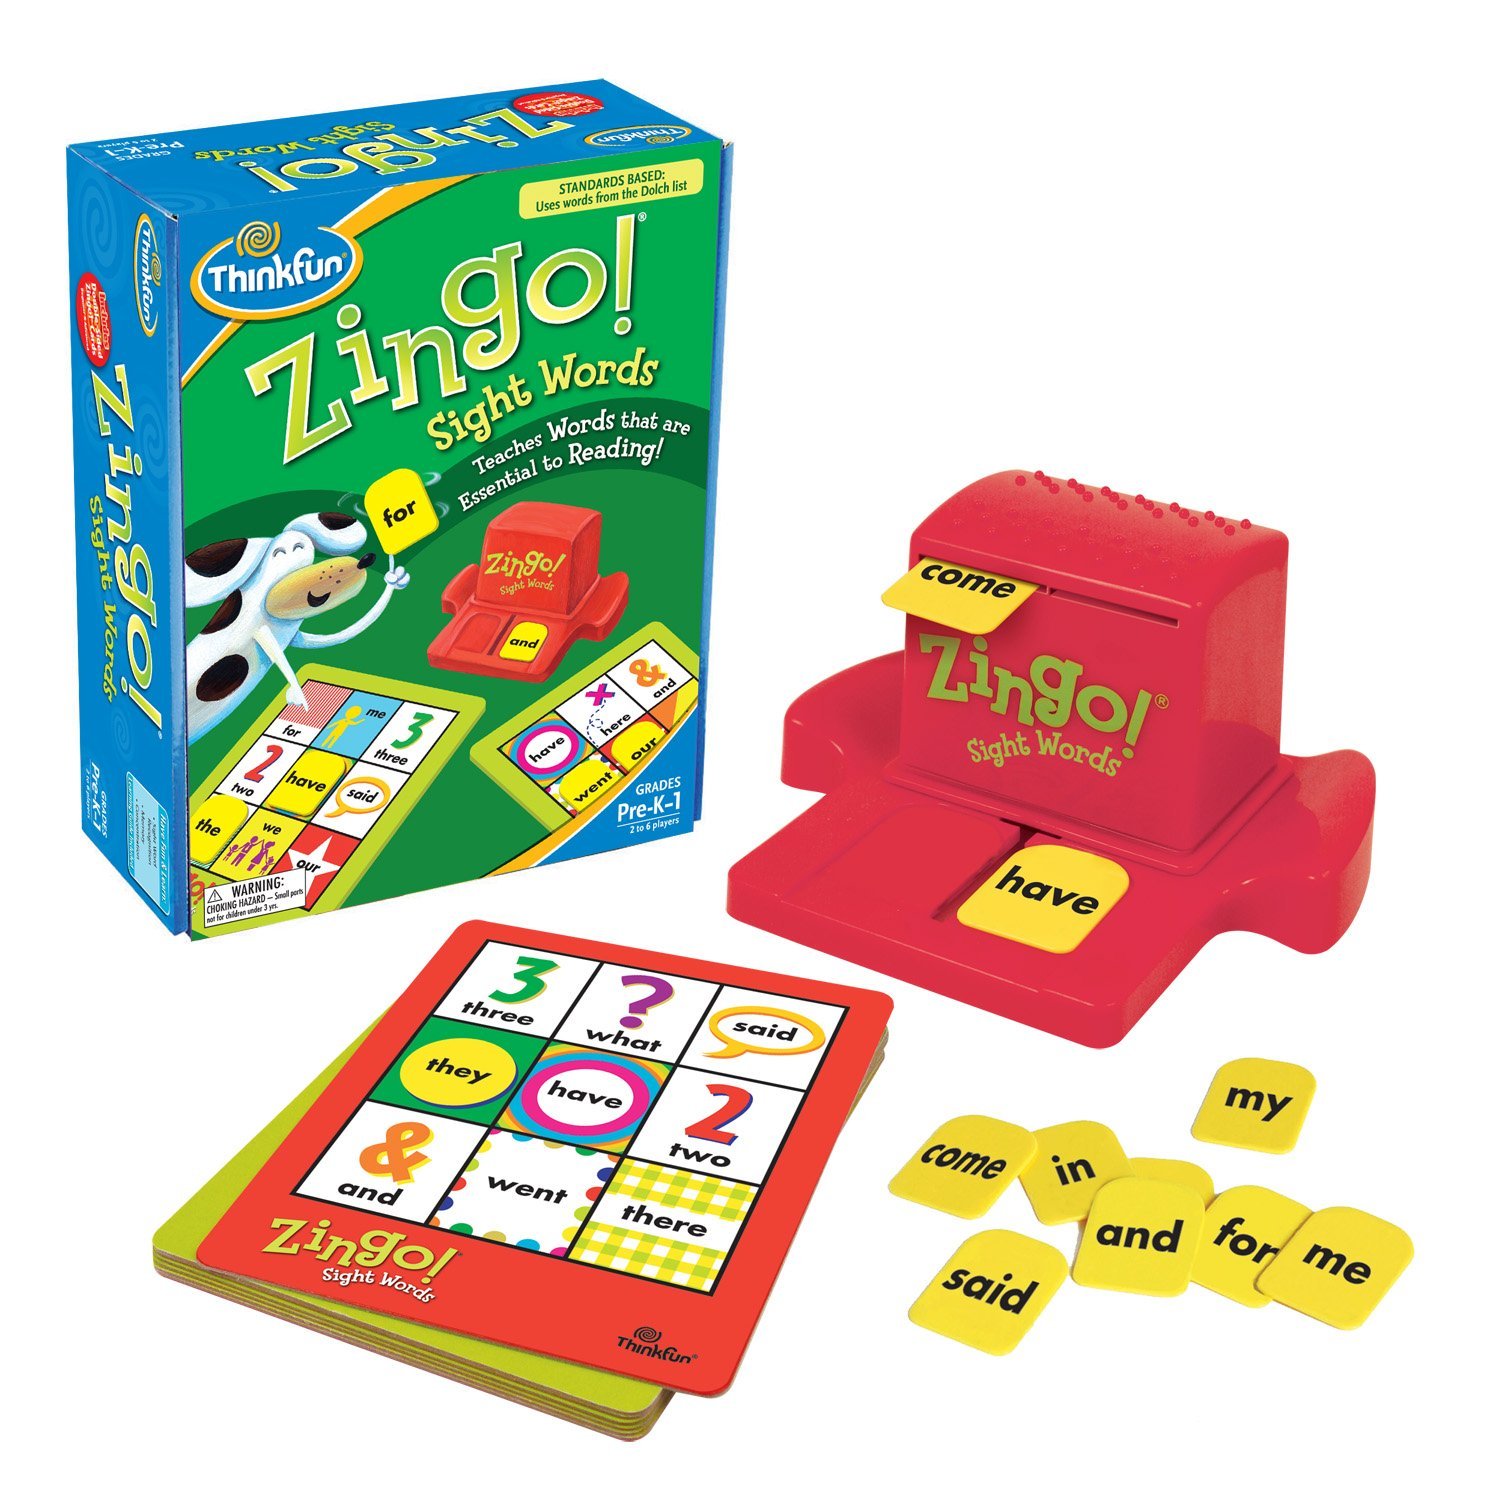 Disguise learning as play with these fun educational games for elementary age kids.